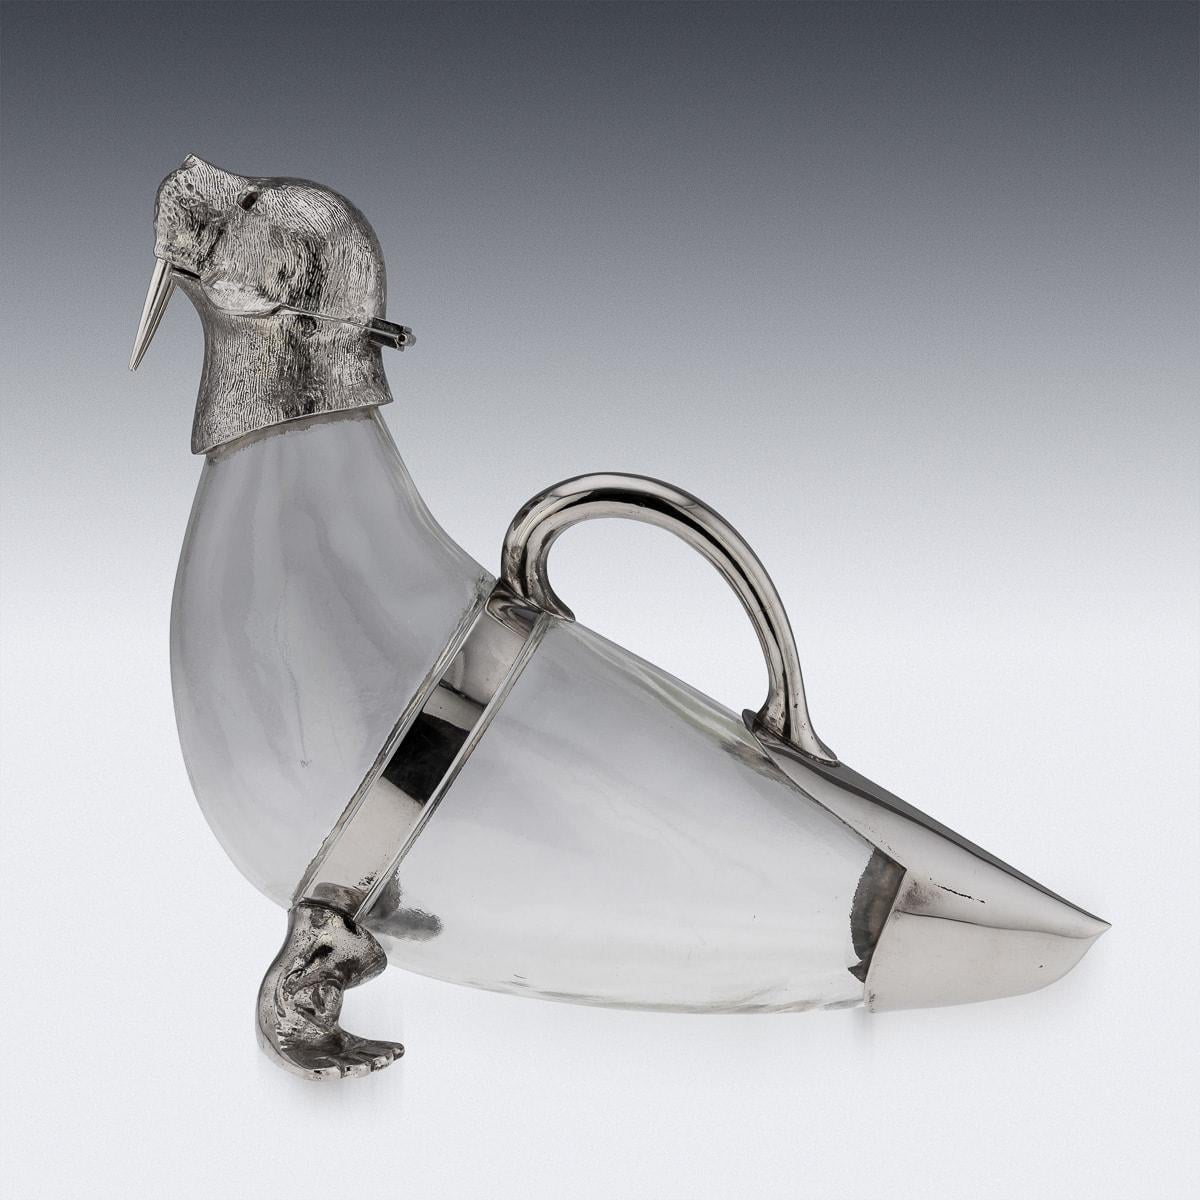 Mid 20th Century zoomorphic silver-plated and glass walrus wine jug is a true marvel of artistry and craftsmanship. This stunning piece seamlessly blends the elegance of silver with the delicacy of glass, resulting in a wine jug that is both